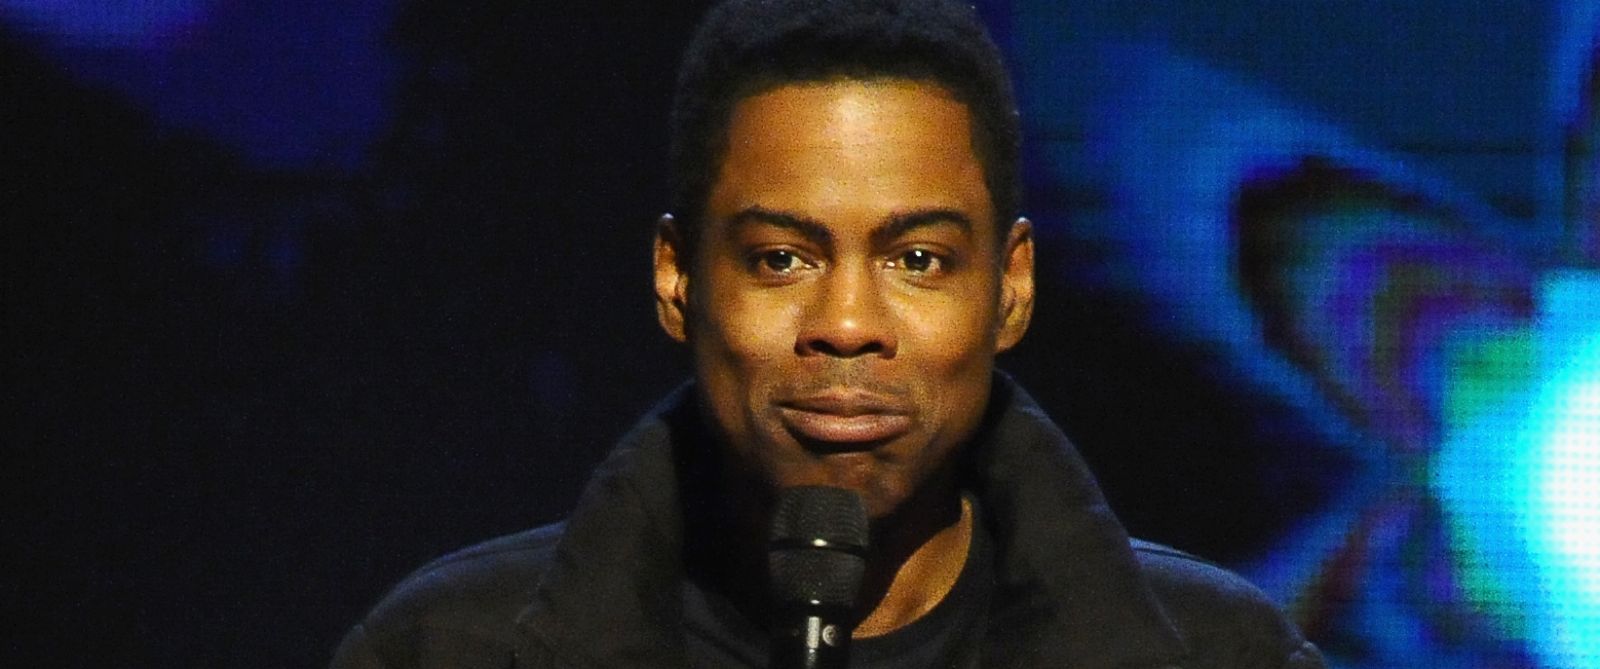 PHOTO: Chris Rock performs on stage in New York City, Feb. 28, 2015.